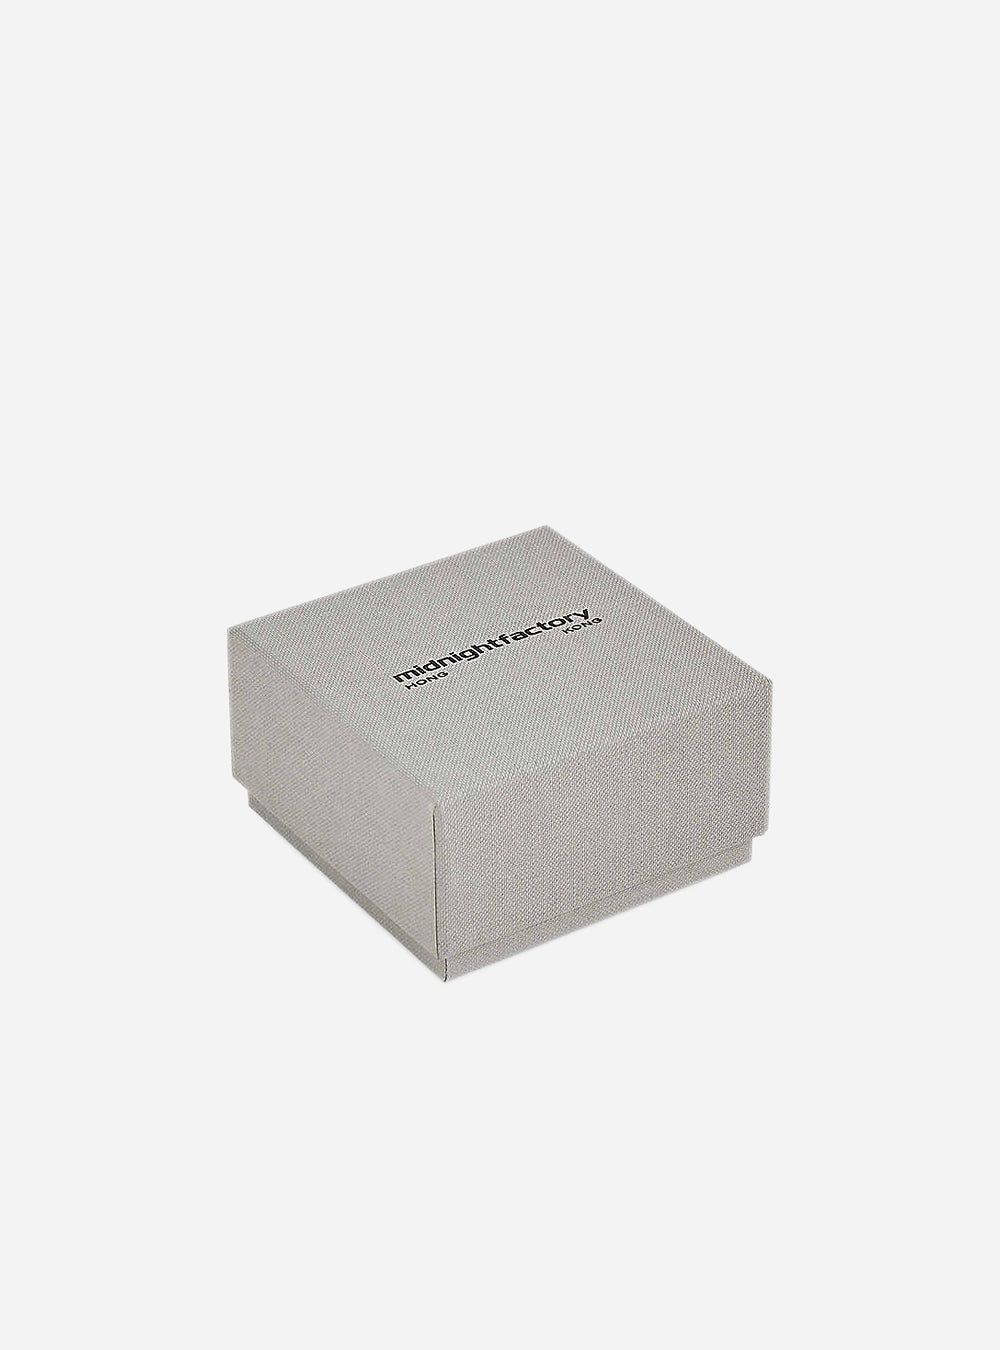 A small grey box with the "MIDNIGHTFACTORY" logo on it.